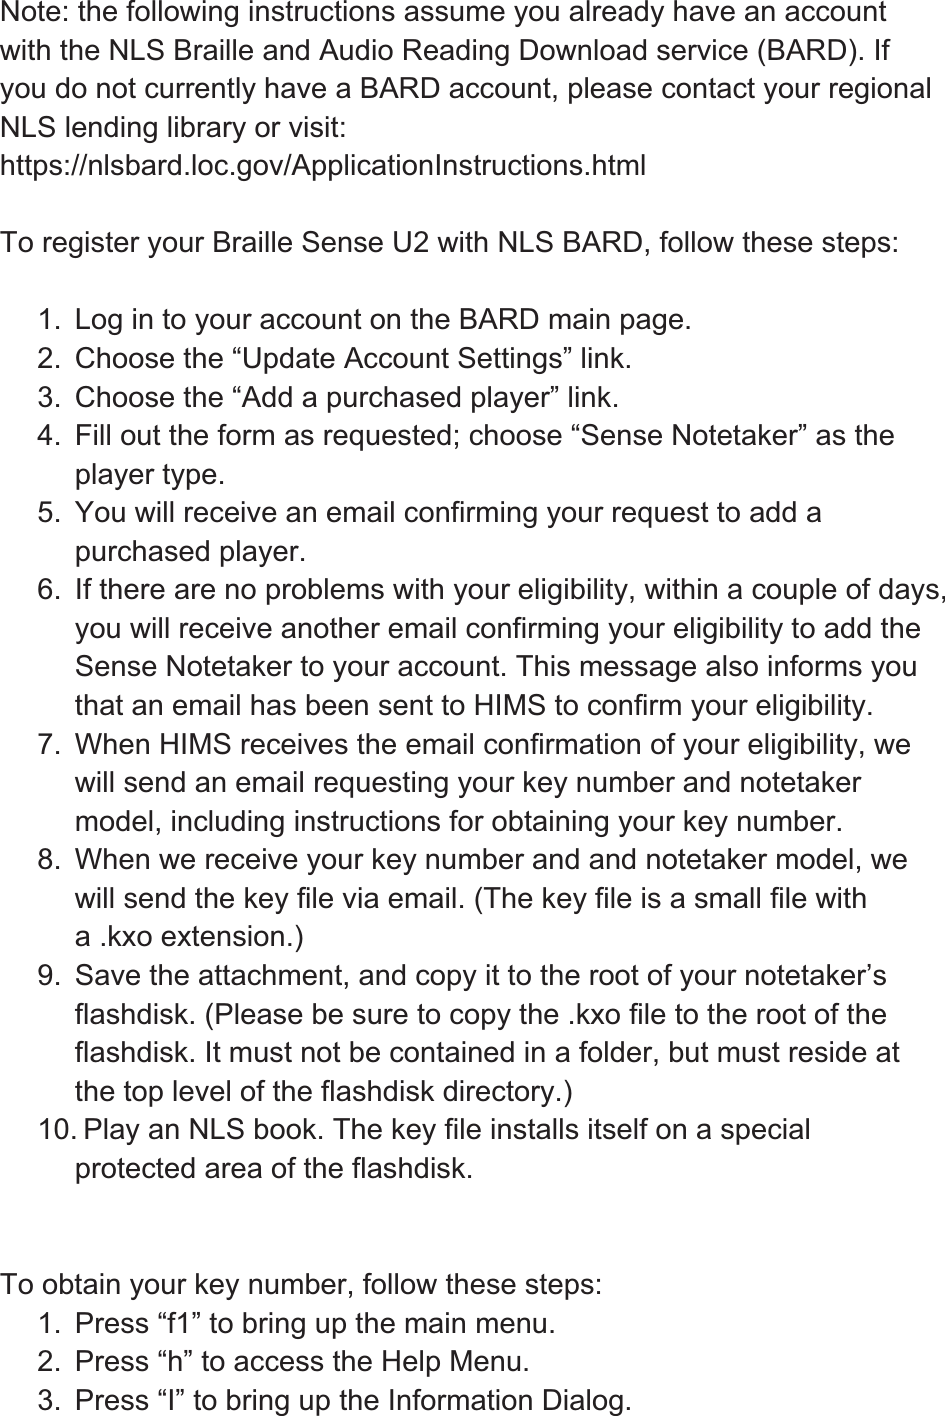 Note: the following instructions assume you already have an account with the NLS Braille and Audio Reading Download service (BARD). If you do not currently have a BARD account, please contact your regional NLS lending library or visit: https://nlsbard.loc.gov/ApplicationInstructions.html To register your Braille Sense U2 with NLS BARD, follow these steps: 1.  Log in to your account on the BARD main page. 2.  Choose the “Update Account Settings” link. 3.  Choose the “Add a purchased player” link. 4.  Fill out the form as requested; choose “Sense Notetaker” as the player type. 5.  You will receive an email confirming your request to add a purchased player. 6.  If there are no problems with your eligibility, within a couple of days, you will receive another email confirming your eligibility to add the Sense Notetaker to your account. This message also informs you that an email has been sent to HIMS to confirm your eligibility. 7.  When HIMS receives the email confirmation of your eligibility, we will send an email requesting your key number and notetaker model, including instructions for obtaining your key number. 8.  When we receive your key number and and notetaker model, we will send the key file via email. (The key file is a small file with a .kxo extension.) 9.  Save the attachment, and copy it to the root of your notetaker’s flashdisk. (Please be sure to copy the .kxo file to the root of the flashdisk. It must not be contained in a folder, but must reside at the top level of the flashdisk directory.) 10. Play an NLS book. The key file installs itself on a special protected area of the flashdisk. To obtain your key number, follow these steps: 1.  Press “f1” to bring up the main menu. 2.  Press “h” to access the Help Menu. 3.  Press “I” to bring up the Information Dialog. 